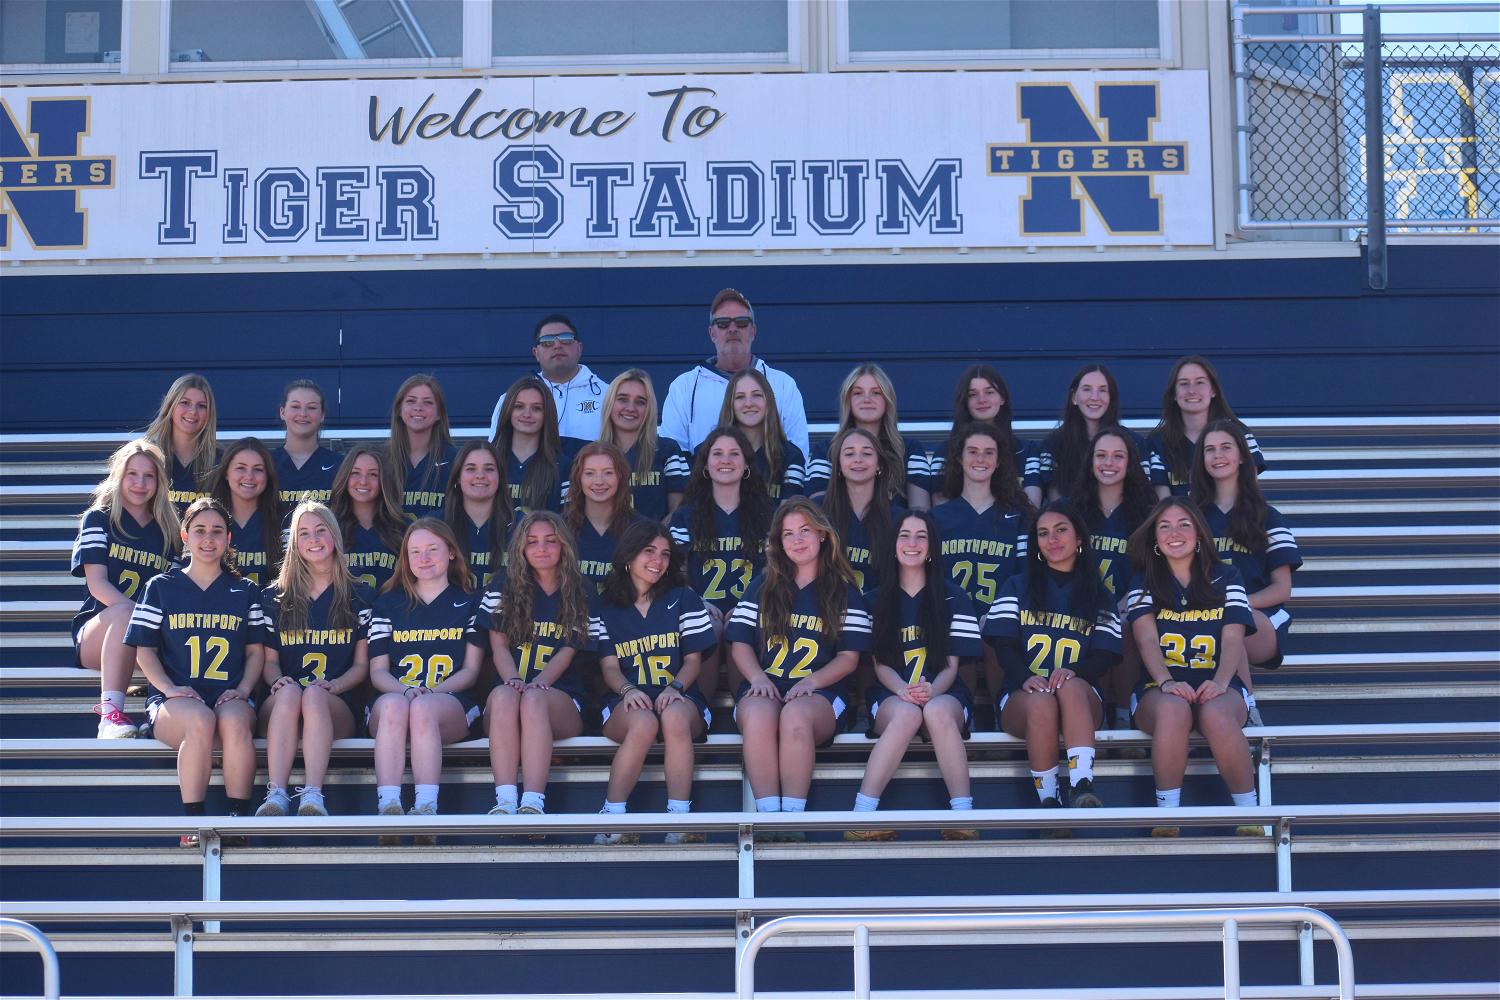 The Northport High School inaugural flag football team at their home stadium. Photo courtesy of the Northport-East Northport UFSD.